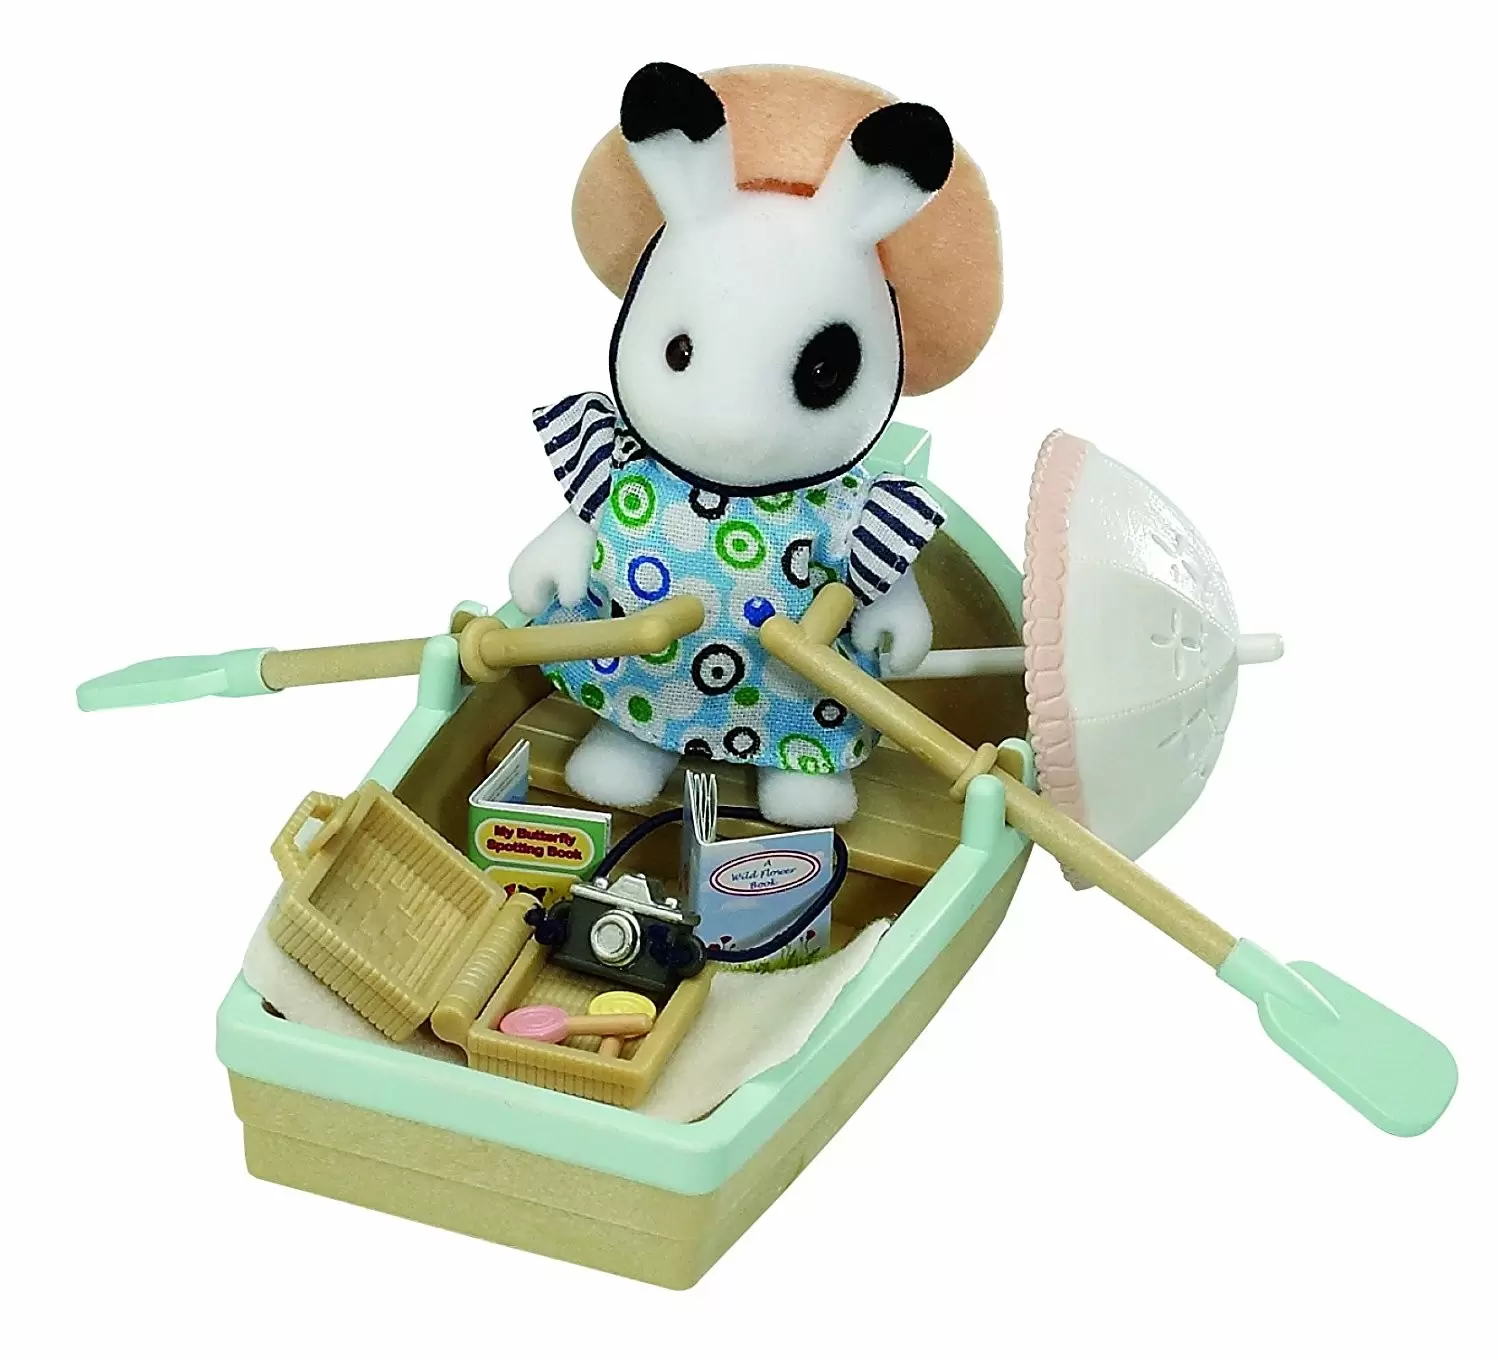 Sylvanian Families (Europe) - Rowing Boat and Accessories